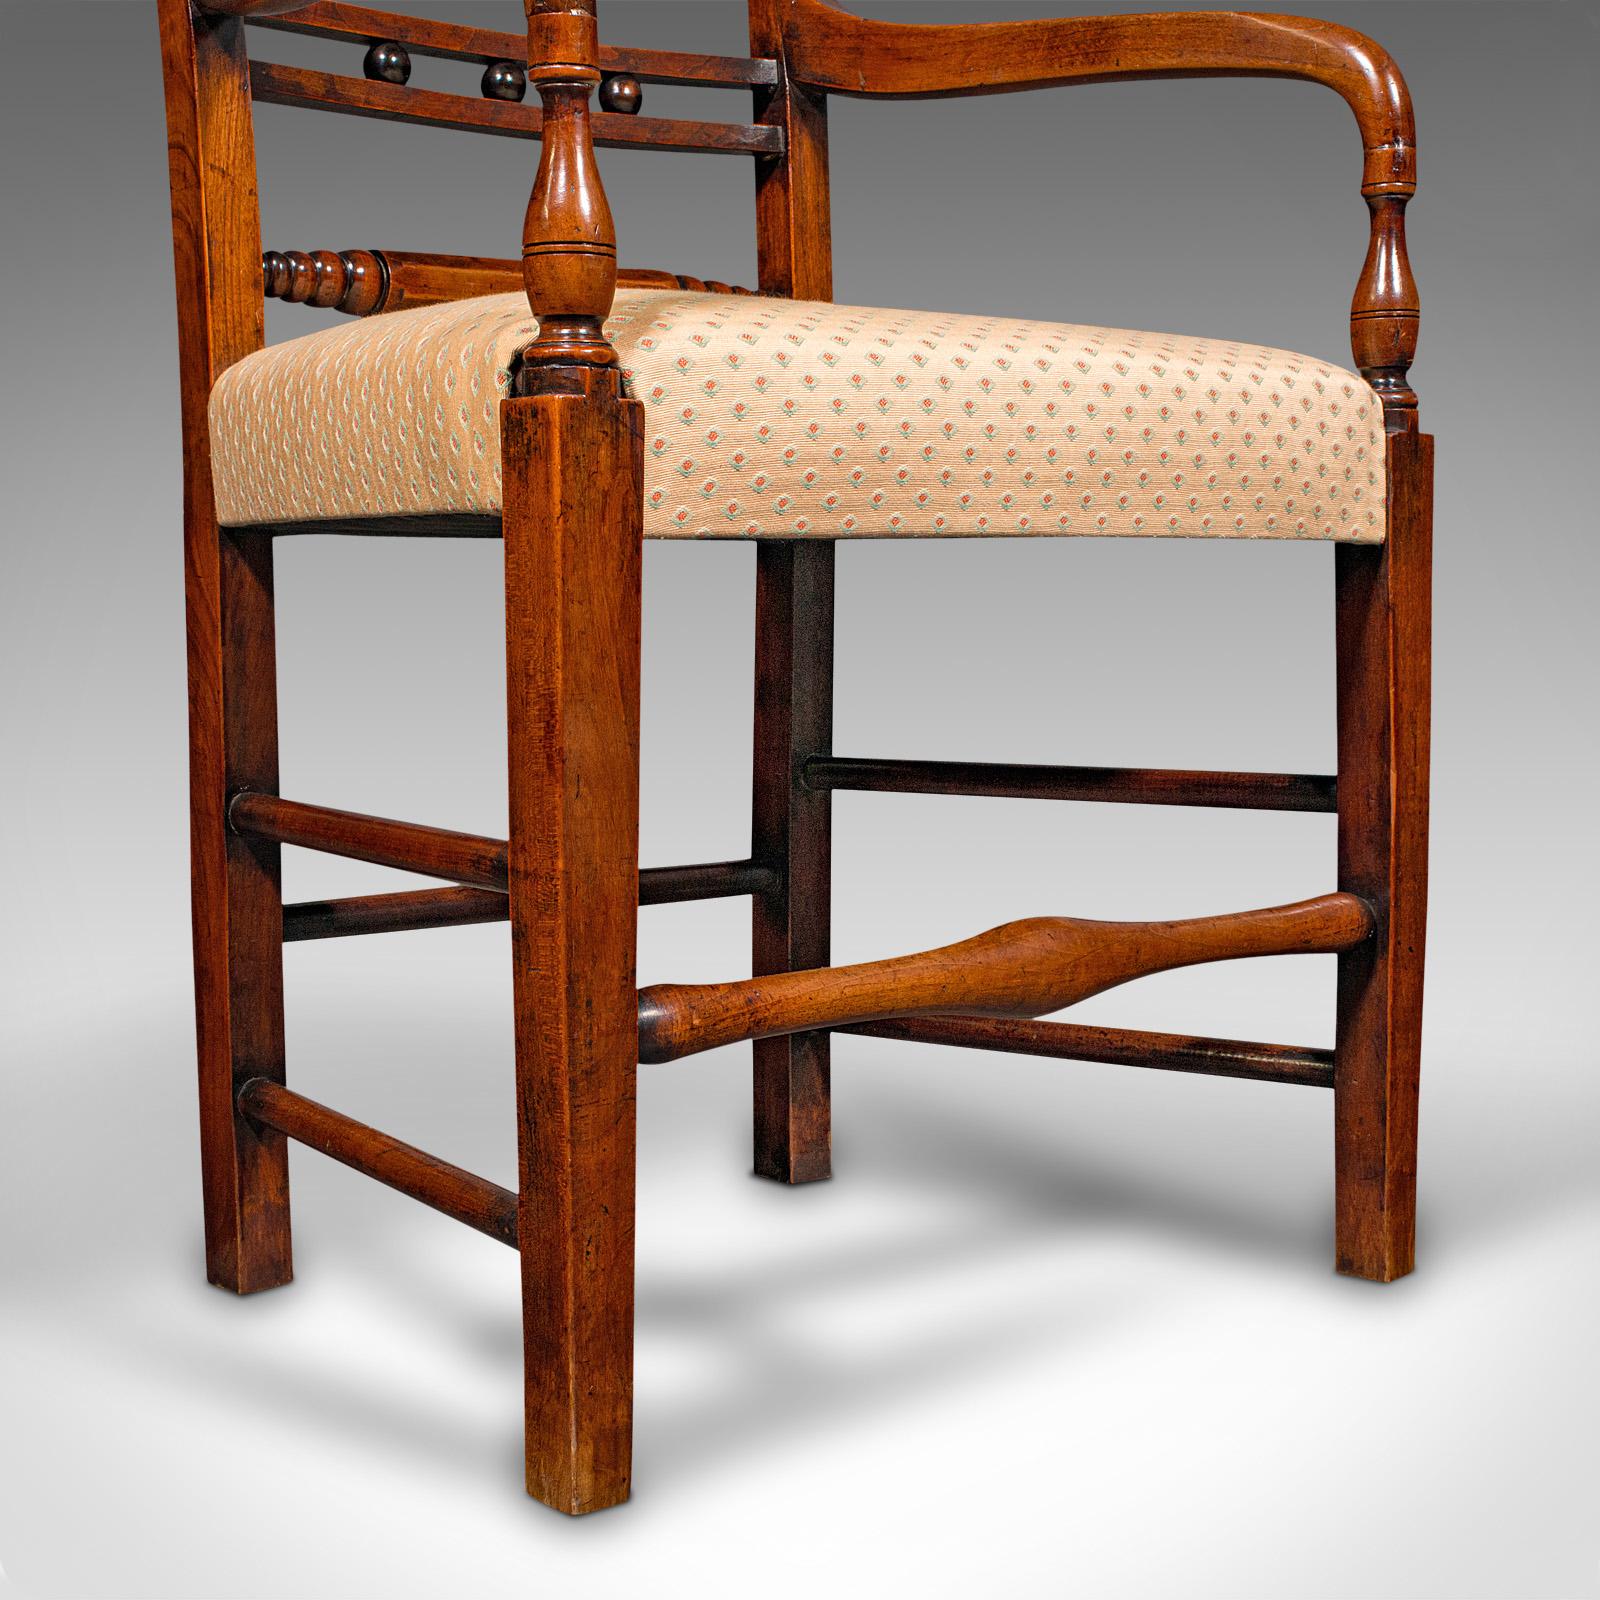 Antique Elbow Chair, English, Fruitwood, Office, Desk Seat, Victorian, C.1870 For Sale 6